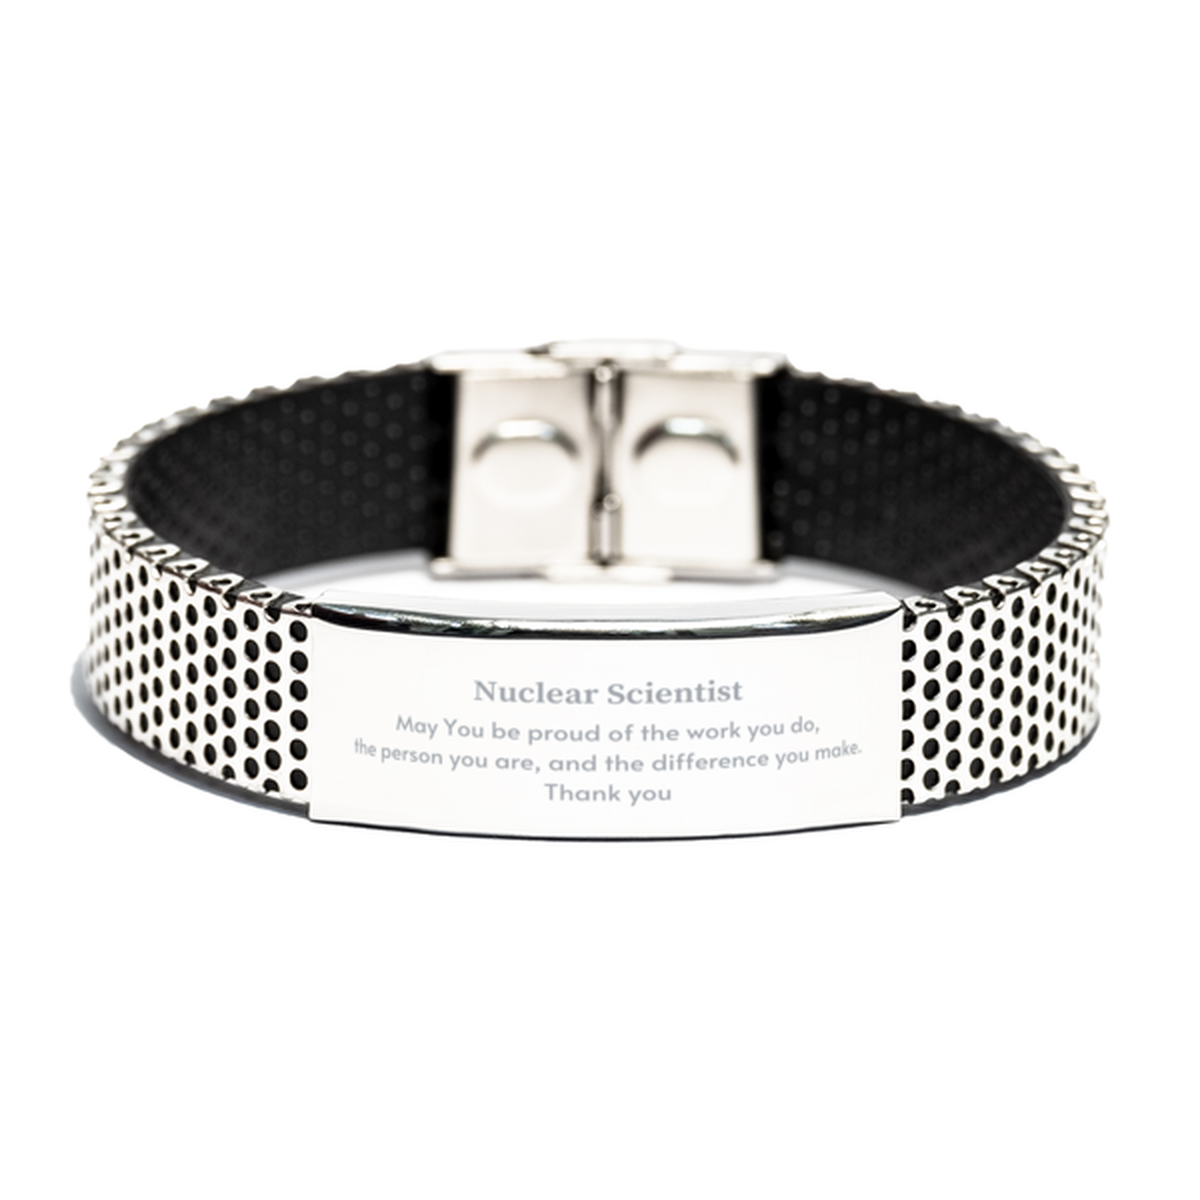 Heartwarming Stainless Steel Bracelet Retirement Coworkers Gifts for Nuclear Scientist, Nuclear Scientist May You be proud of the work you do, the person you are Gifts for Boss Men Women Friends